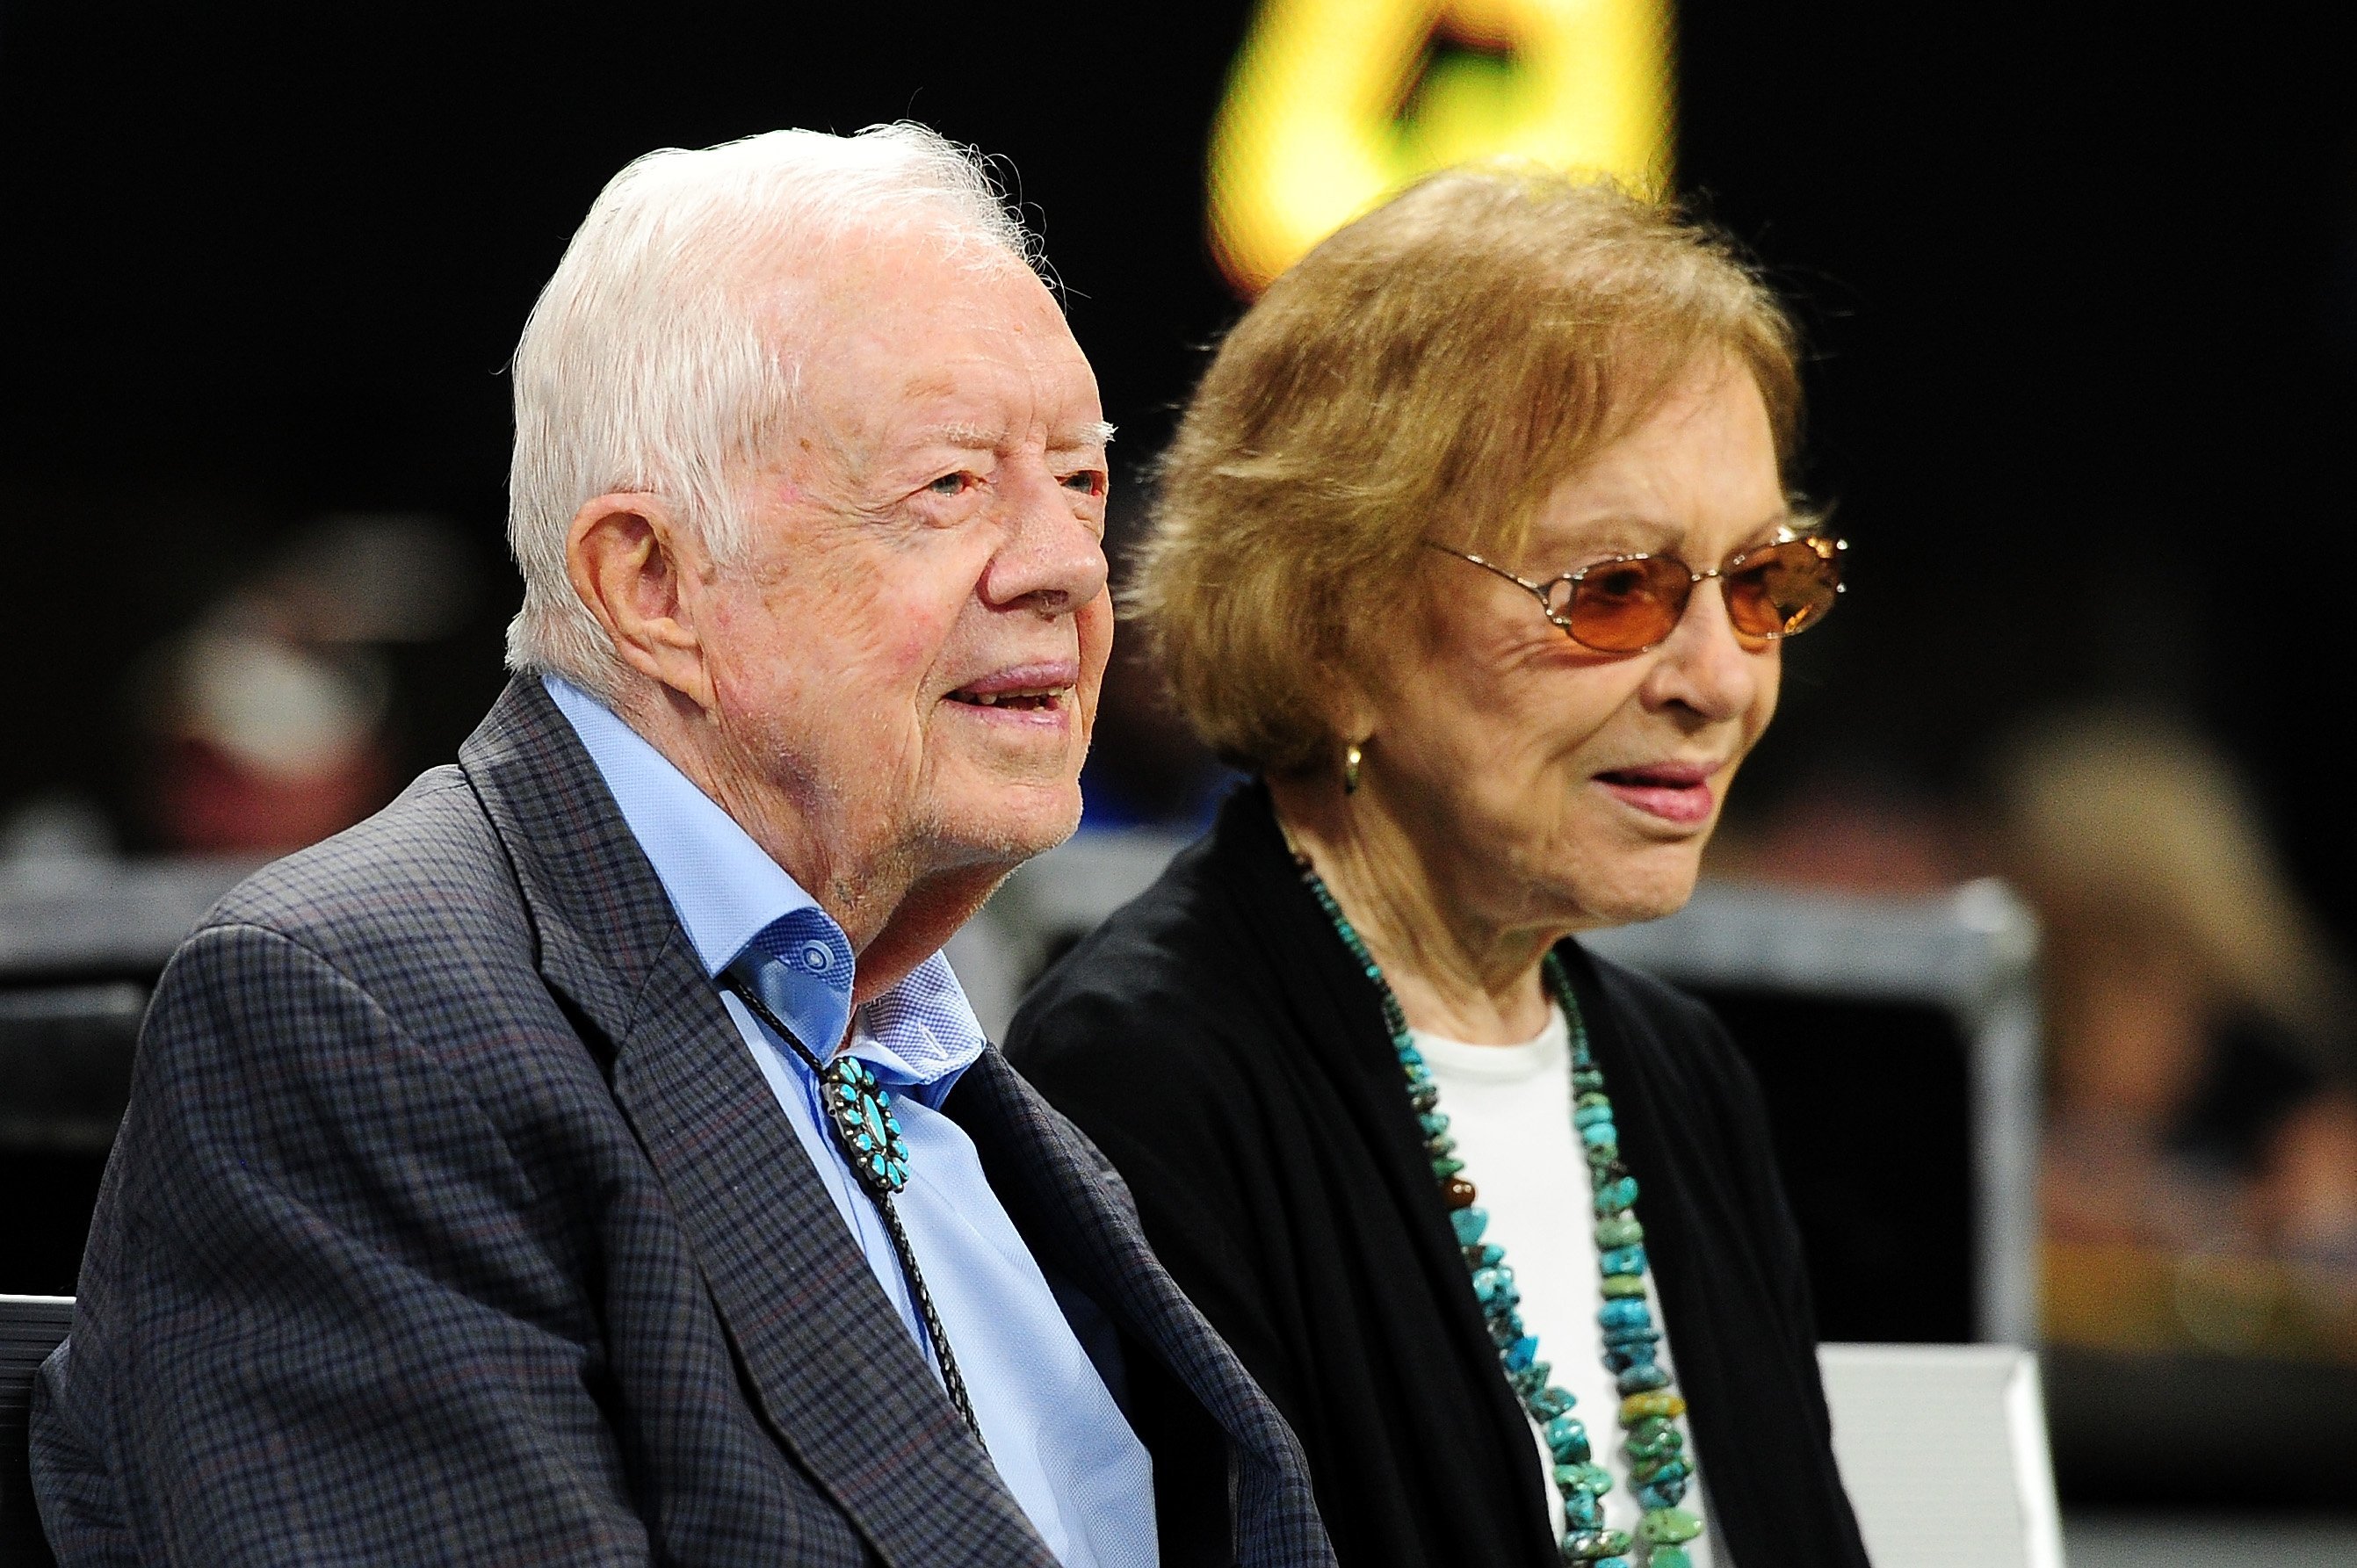 Former president Jimmy Carter and his wife Rosalynn prior to the game between the Atlanta Falcons and the Cincinnati Bengals at Mercedes-Benz Stadium | Source: Getty Images